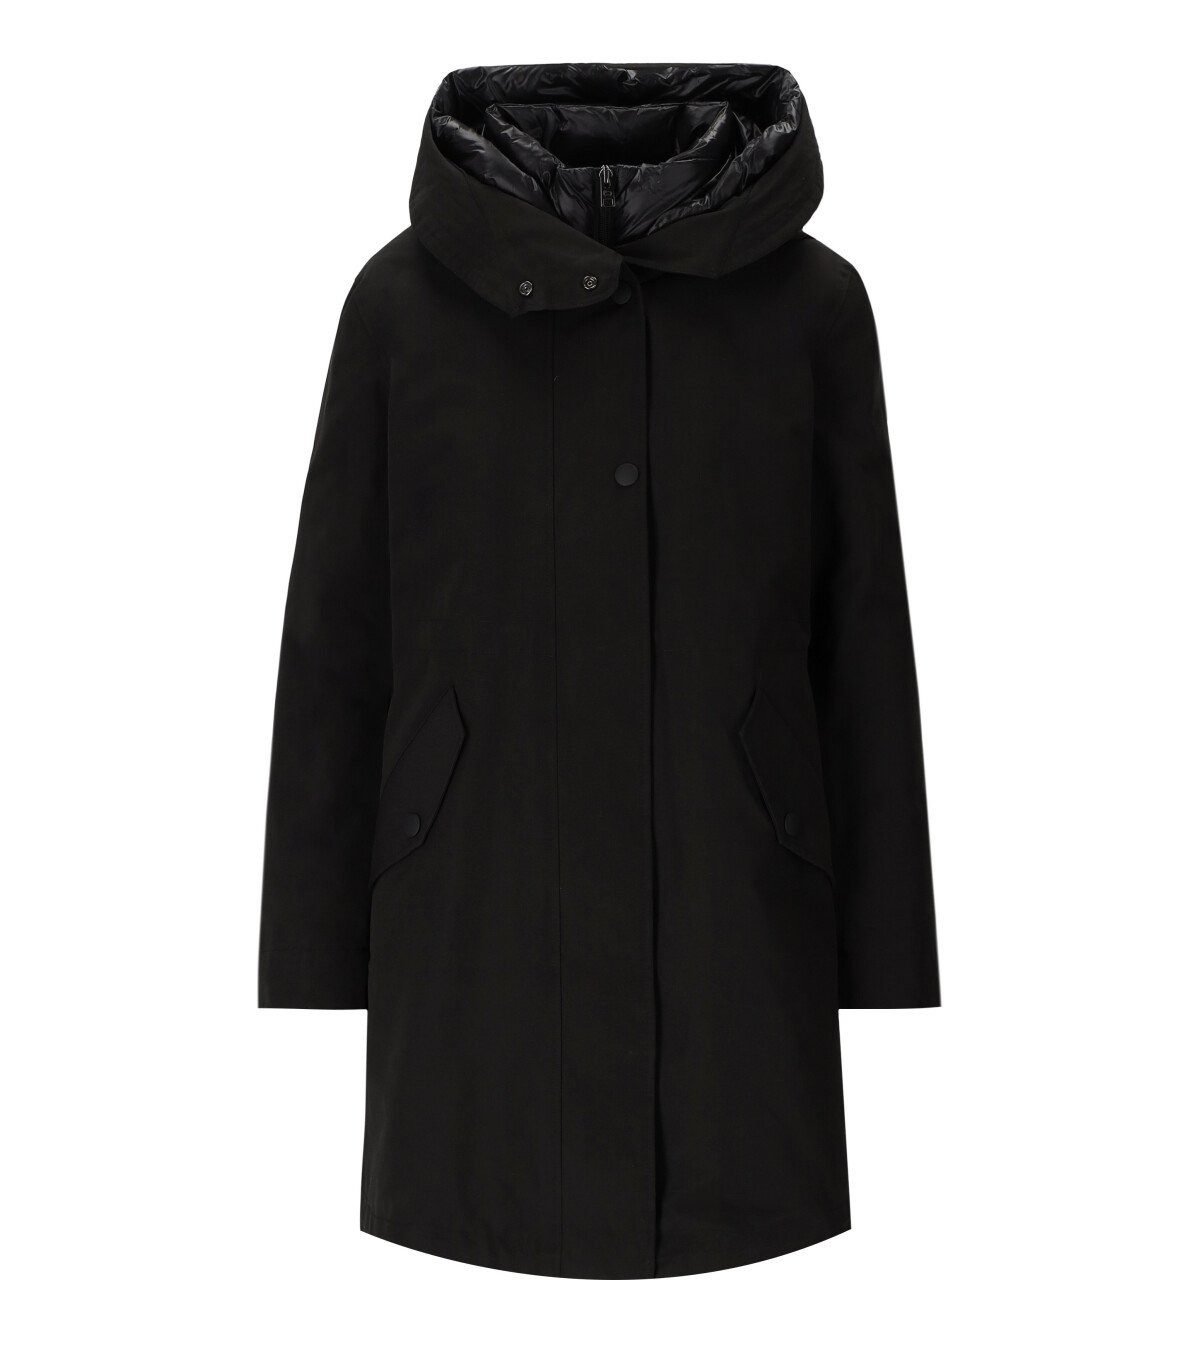 WOOLRICH LONG MILITARY 3 IN 1 BLACK PARKA